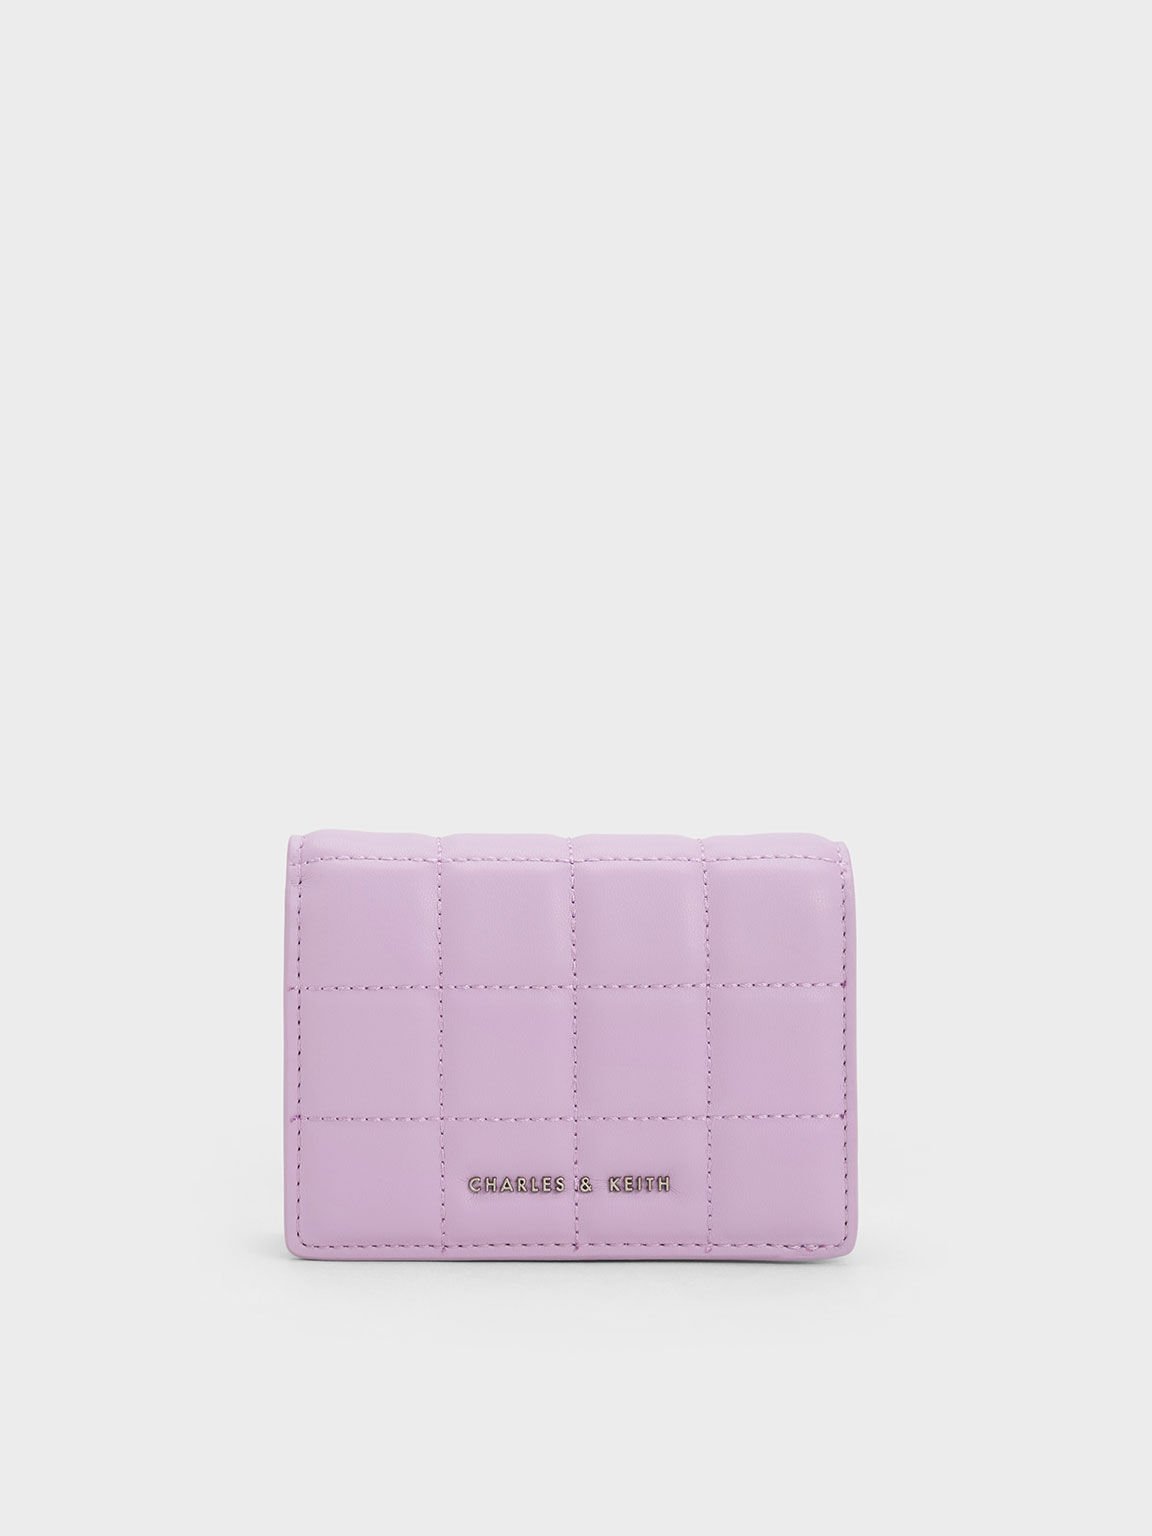 Light Blue Quilted Mini Wallet, CHARLES & KEITH